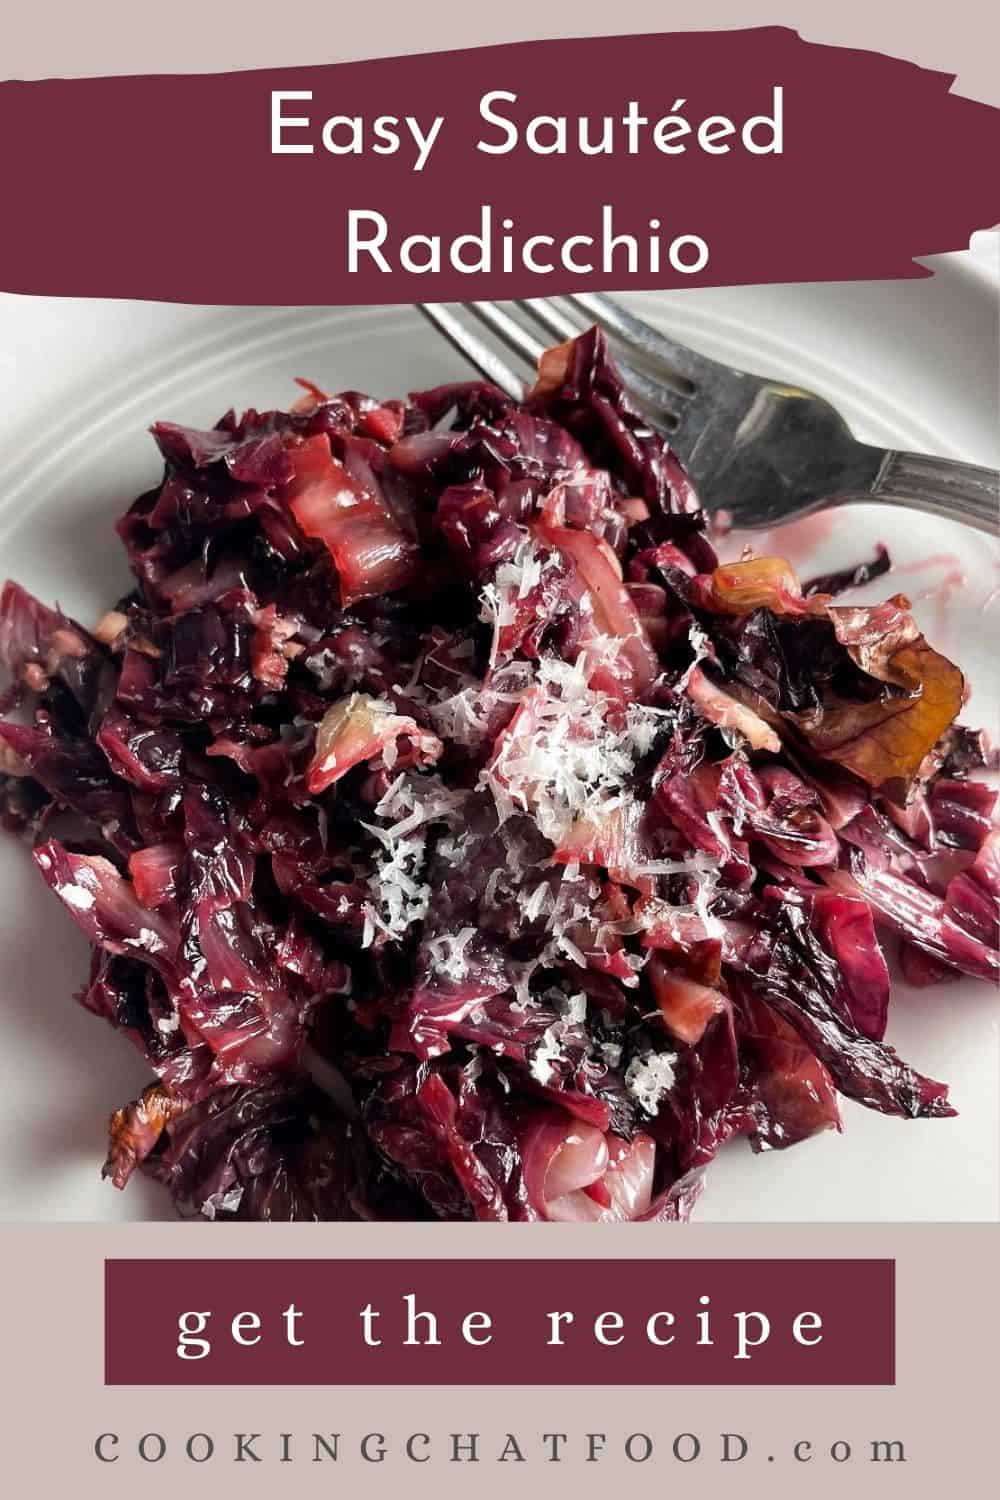 image of sautéed radicchio topped with Parmesan cheese. Along with text that says "Sauteed Radicchio".